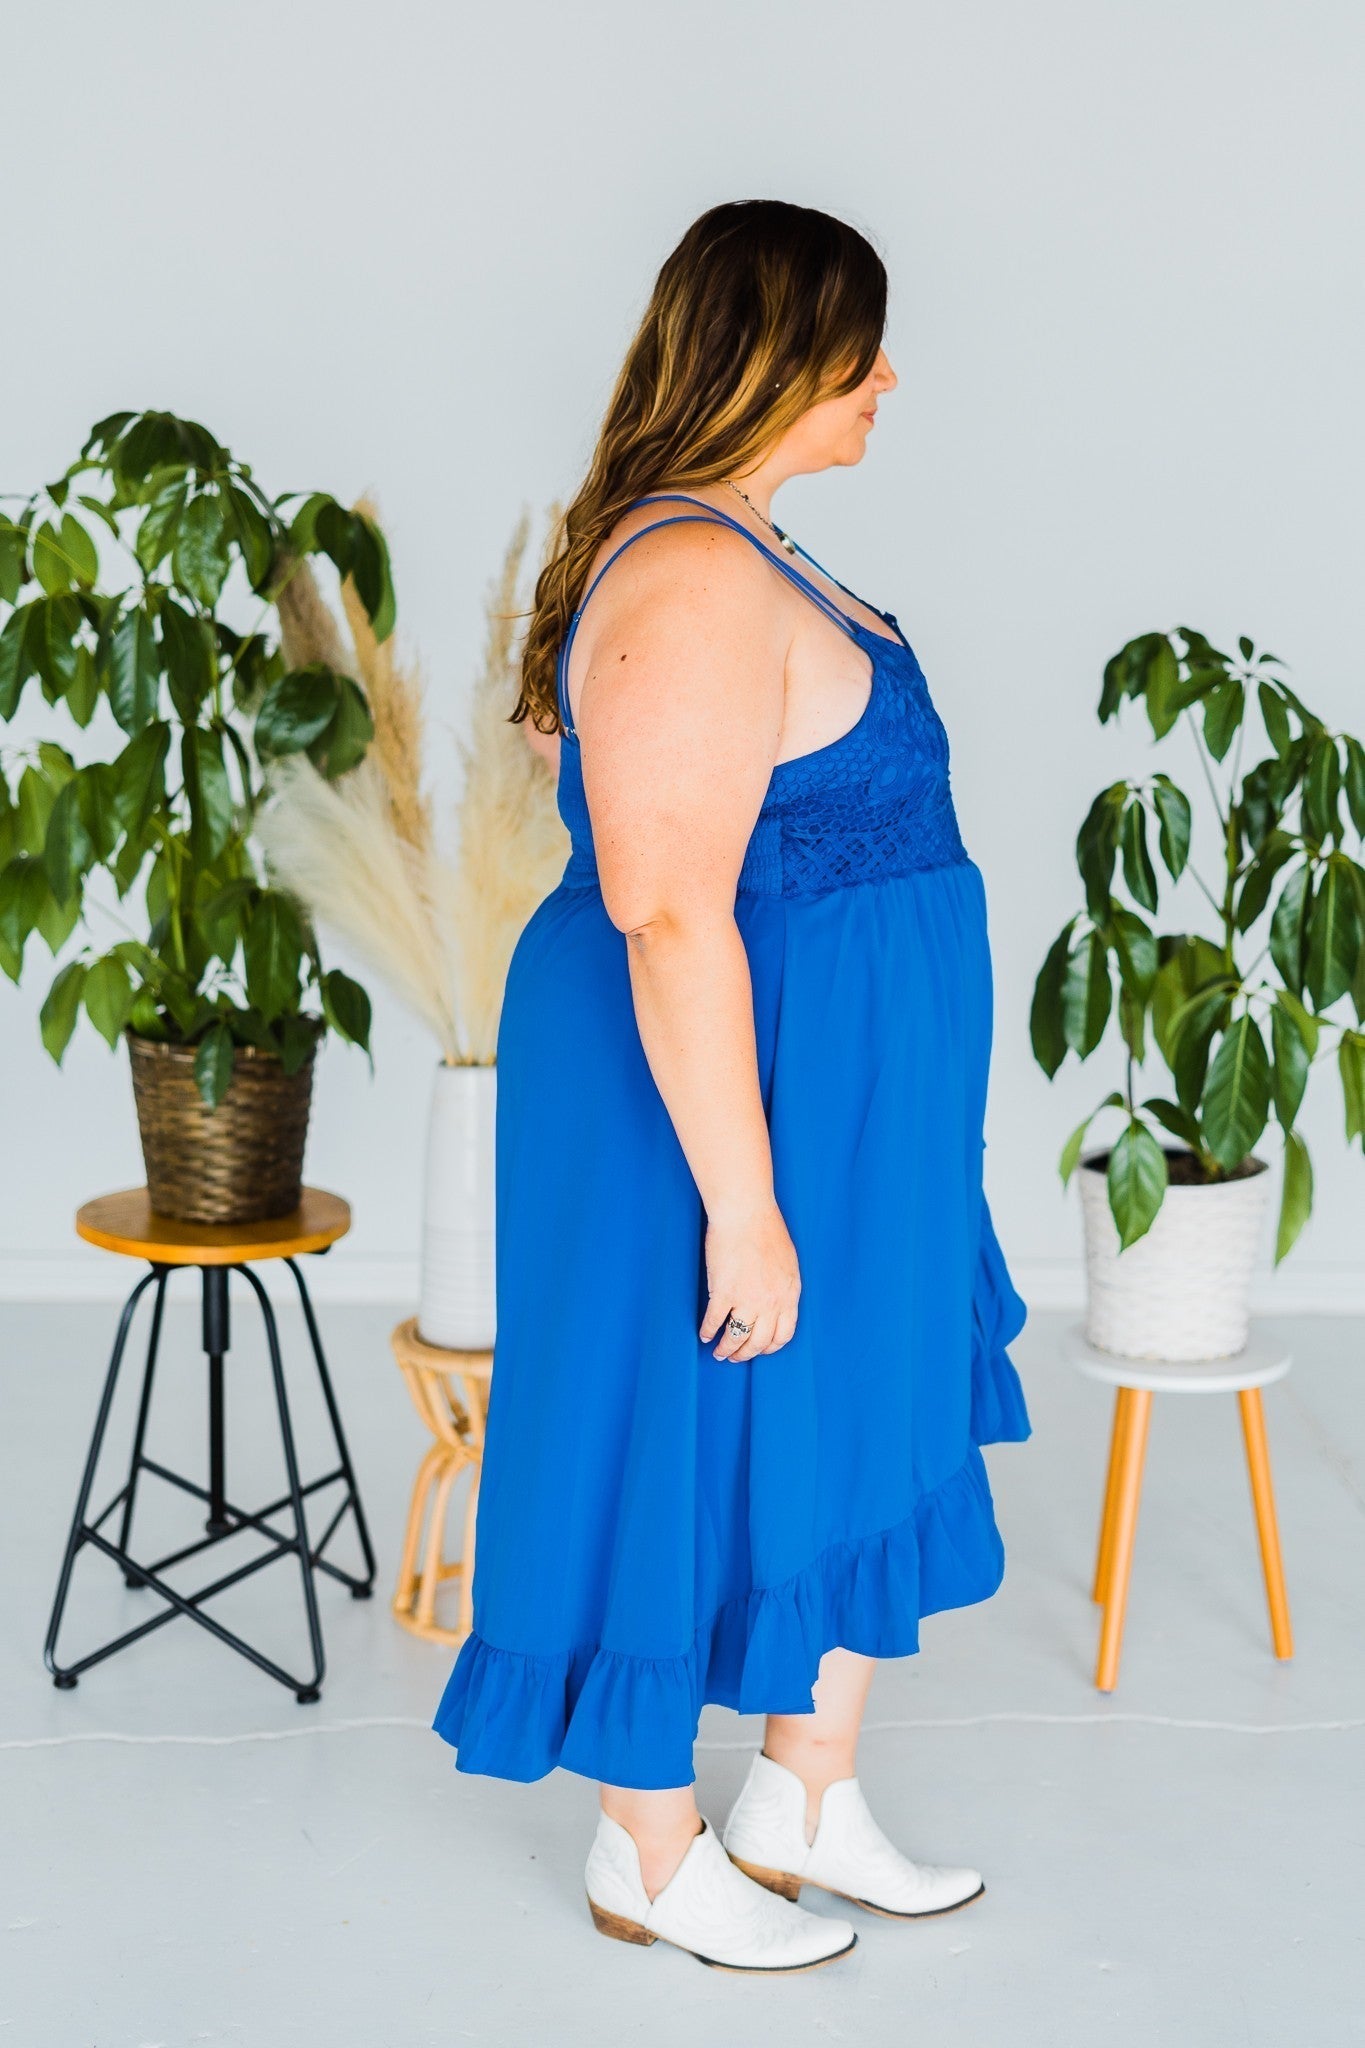 Royal Blue Lace With Ruffle Bottom Dress - Whiskey Skies